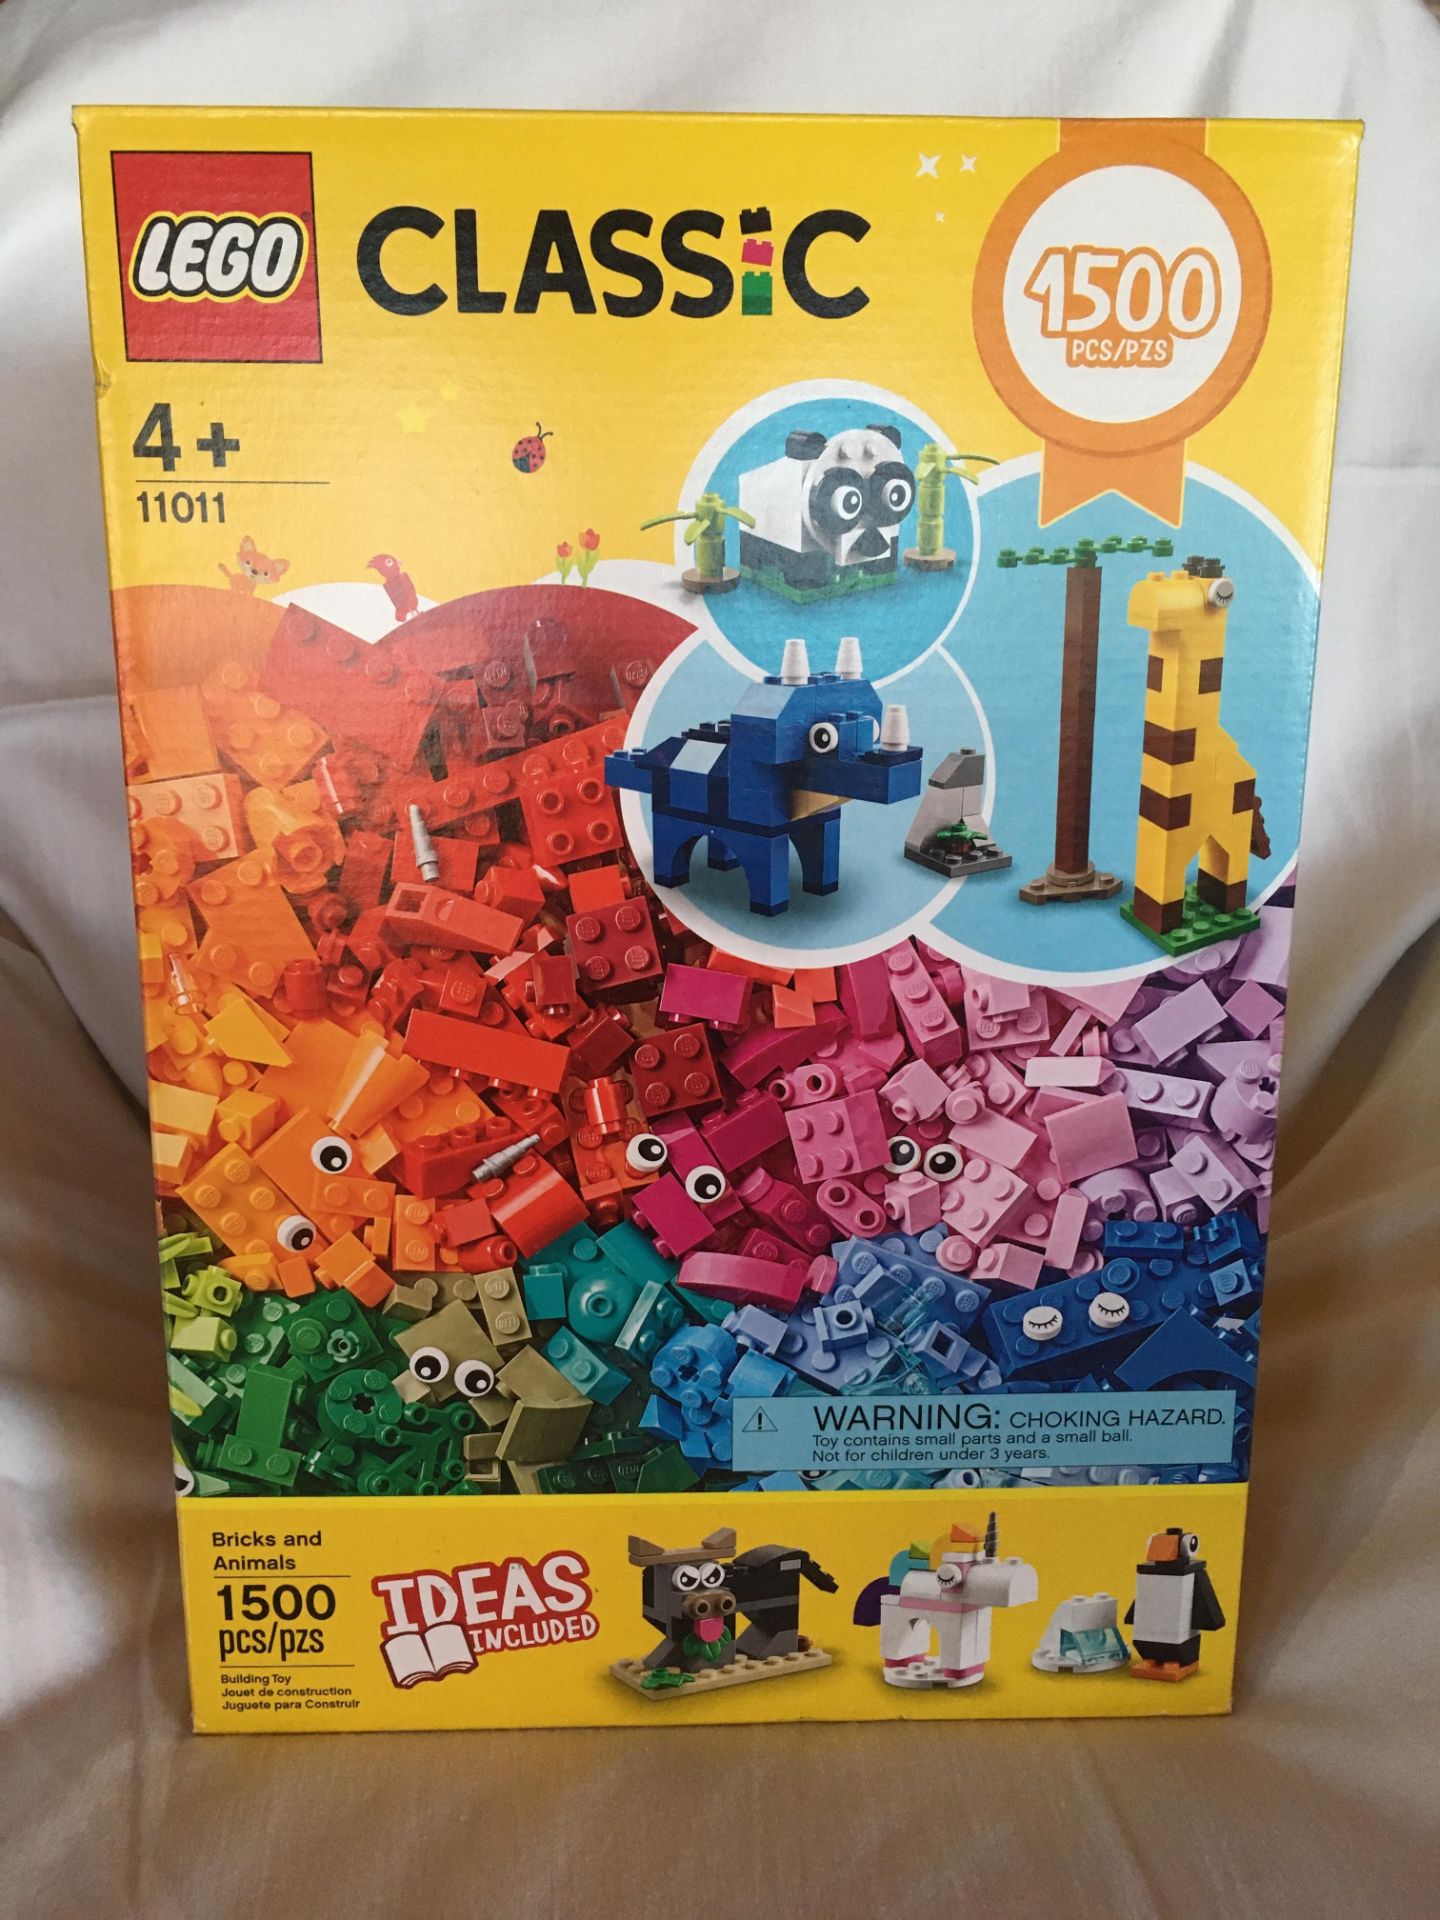 1,500 PIECES OF CLASSIC LEGO Donated by: Laura Grinde Value: $75.00